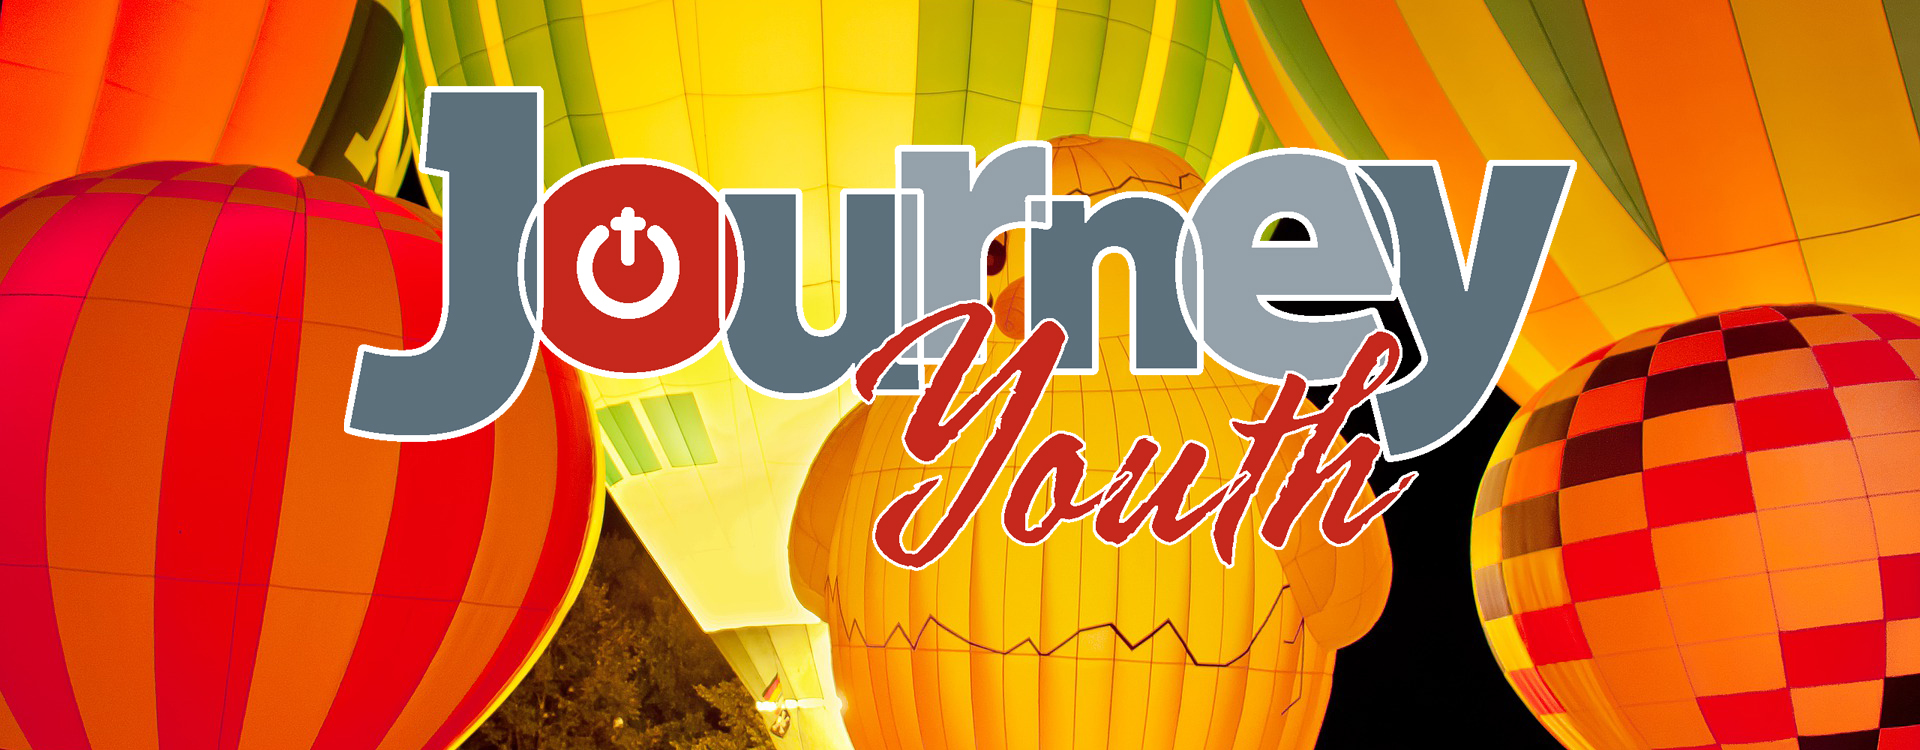 journey church youth